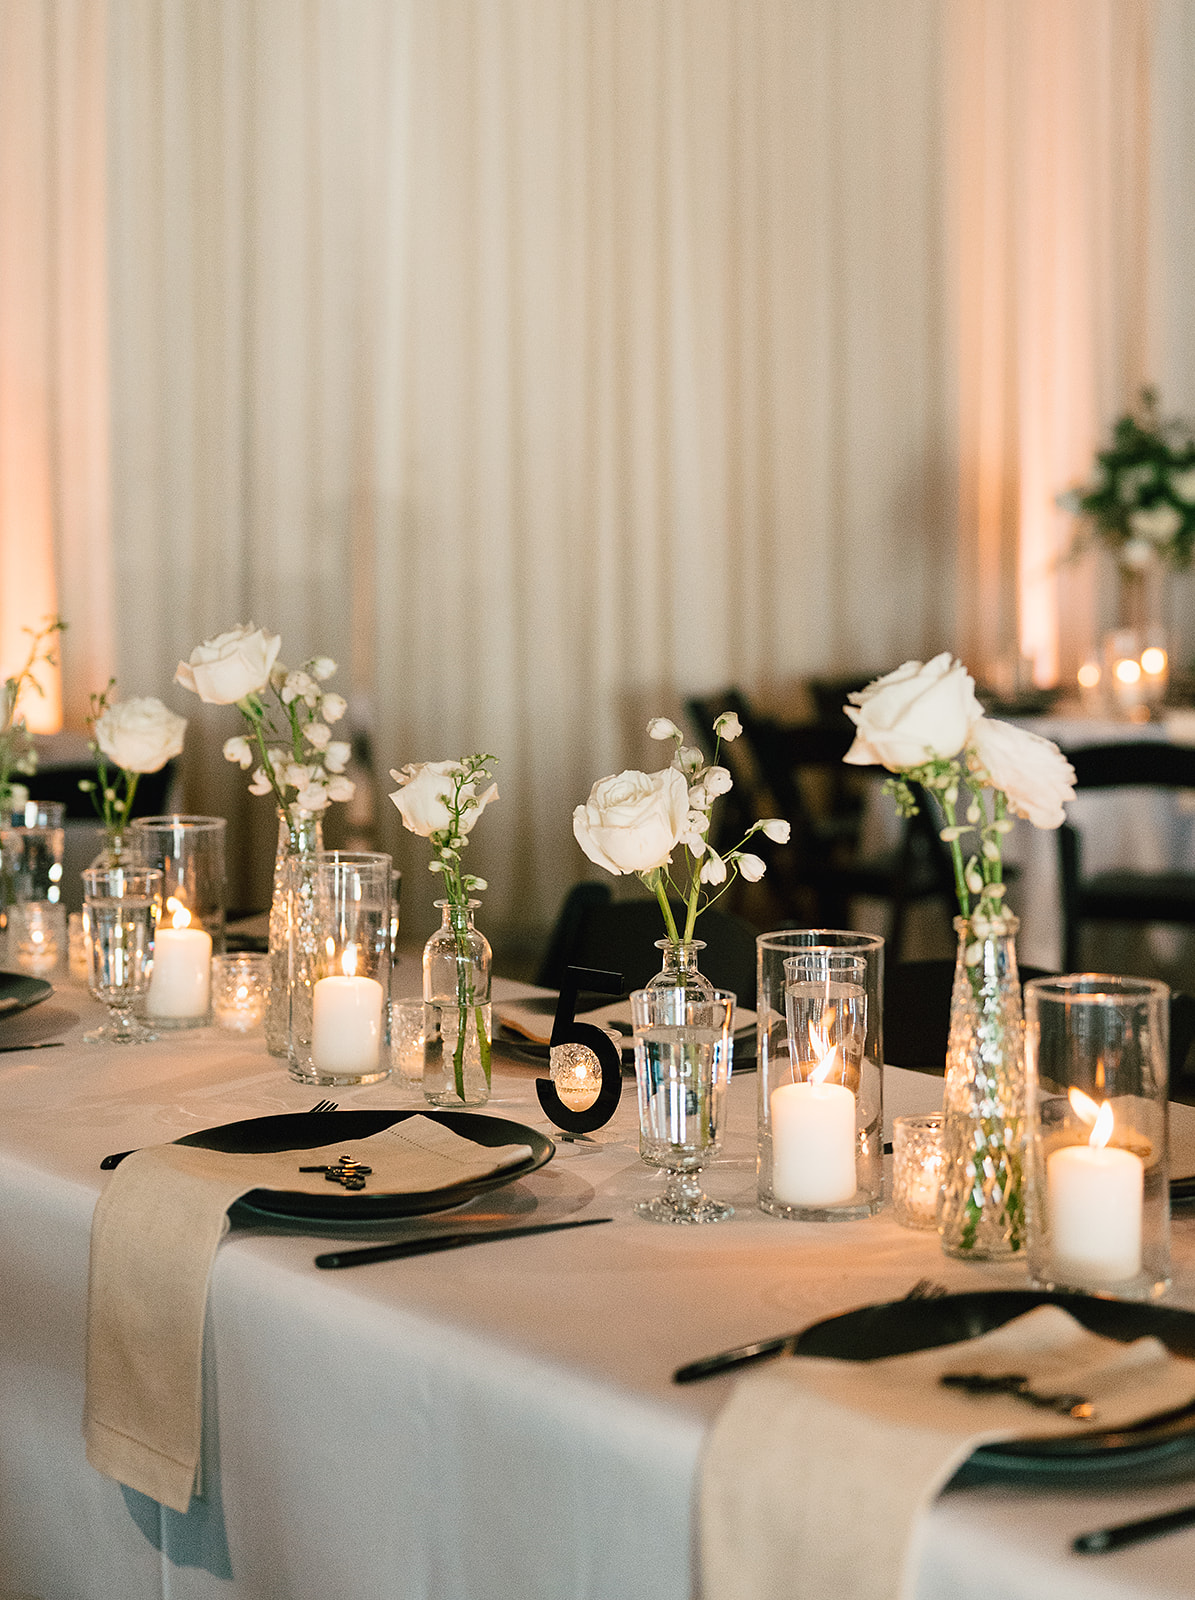 Details of a table setting with white flowers and white linens at a Saint Elle Wedding